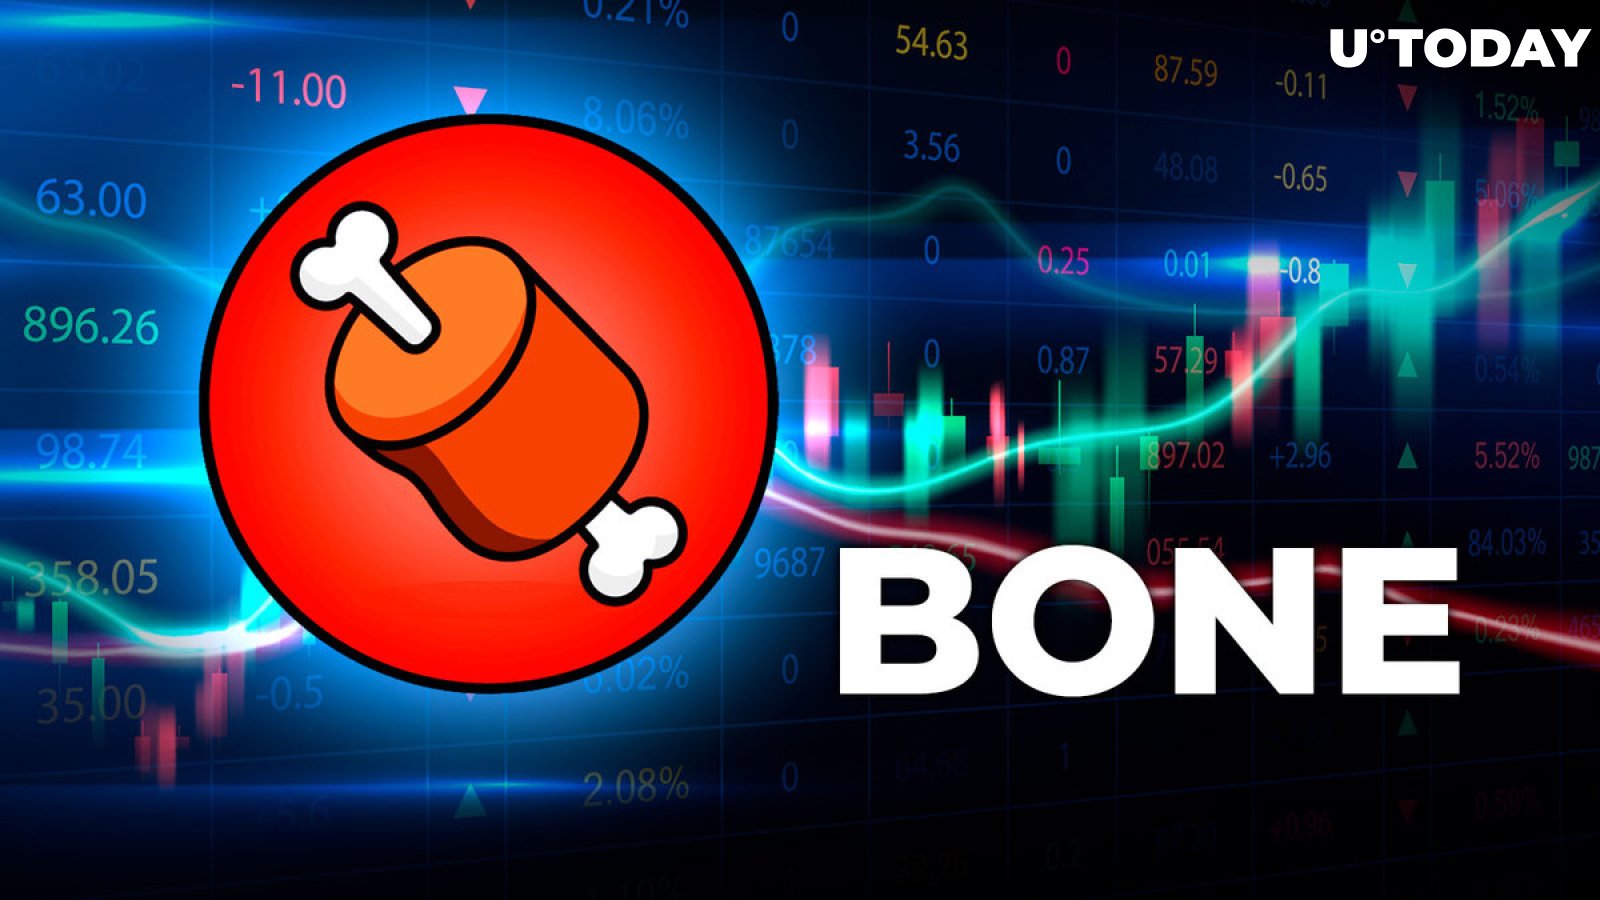 Shiba Inu: BONE Triggers 858% On-chain Surge After This Exchange’s Announcement